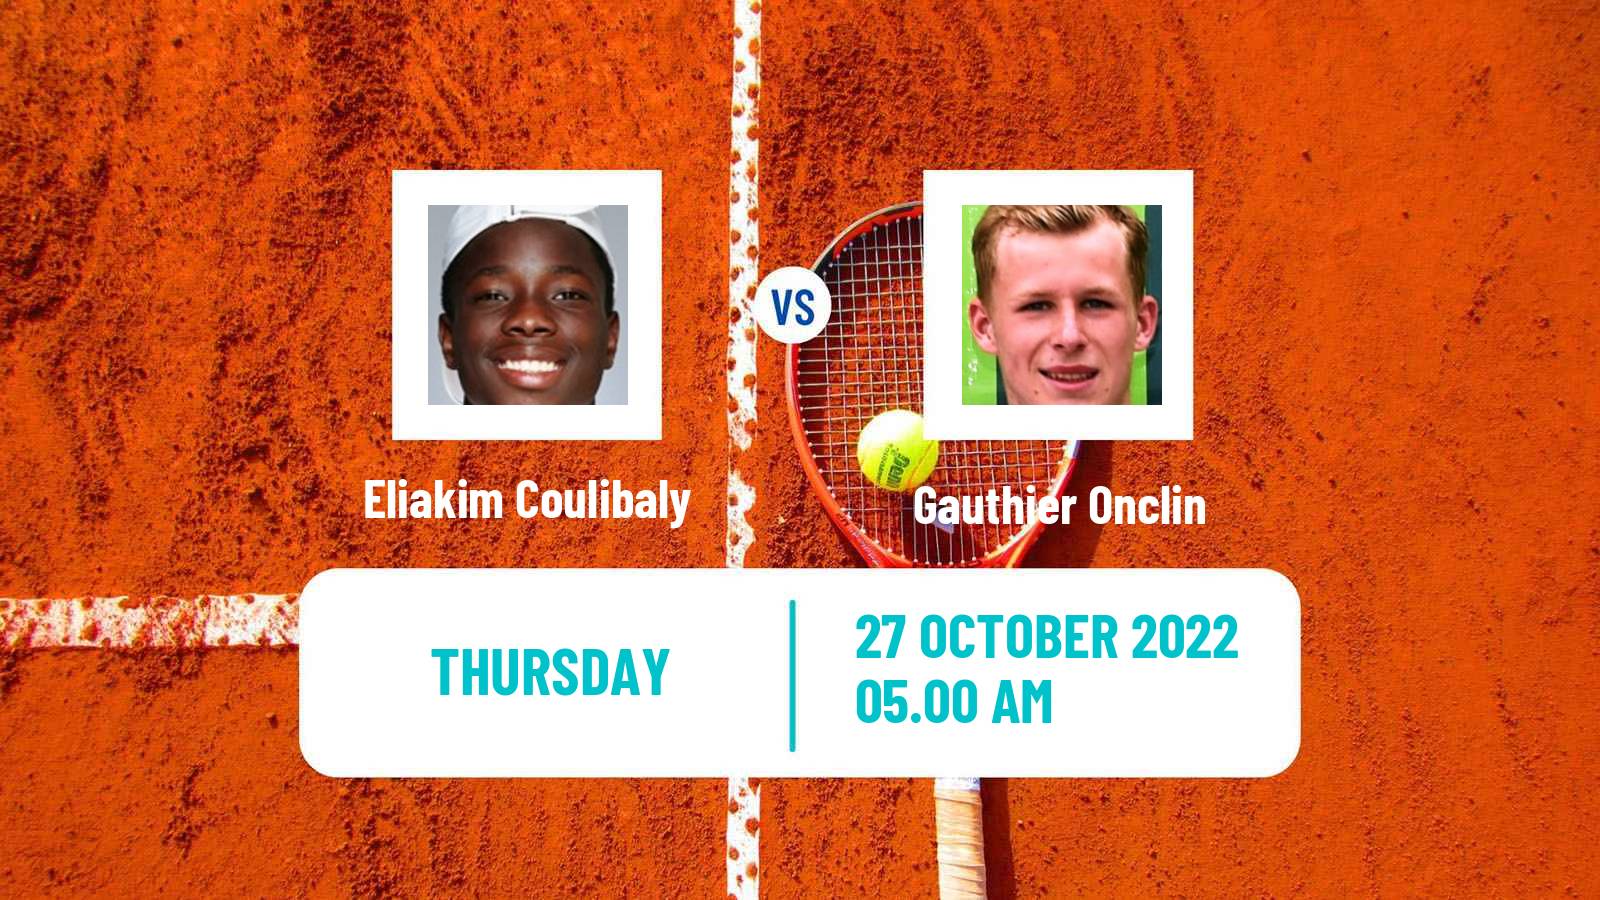 Tennis ITF Tournaments Eliakim Coulibaly - Gauthier Onclin